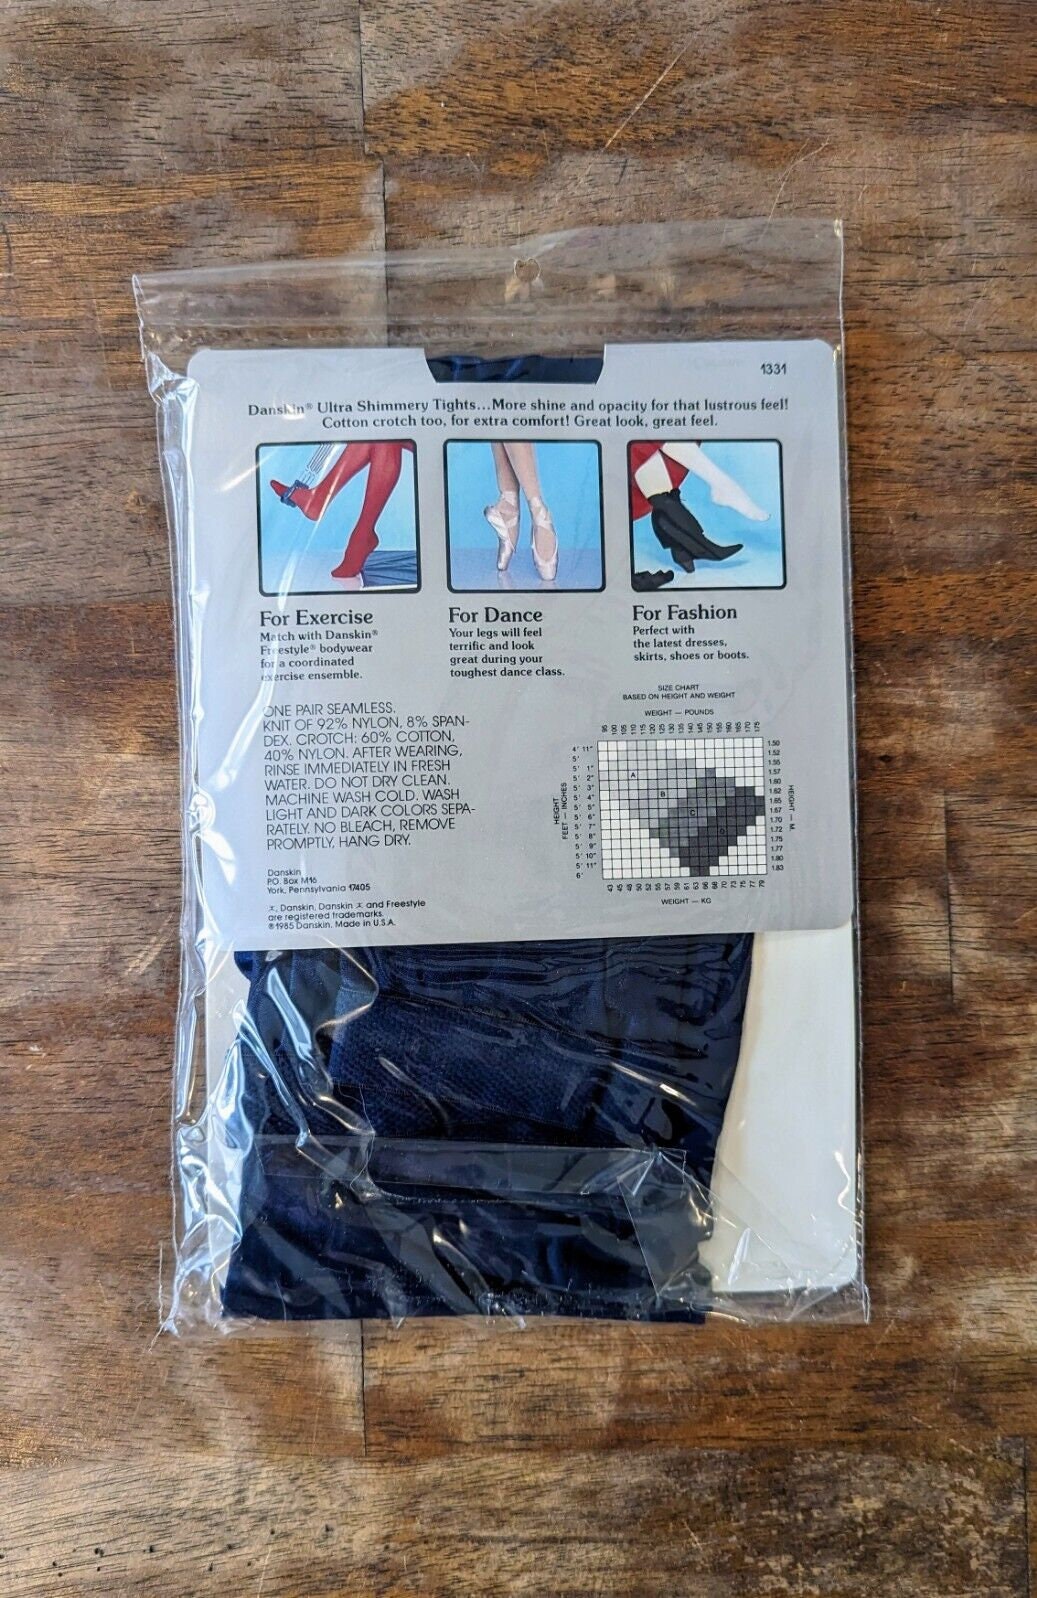 Vintage 1985 DANSKIN Ultra Shimmery Tights Pantyhose Navy Blue A NIP 1331  Hose Nylon New in Package Dance Exercise Retro